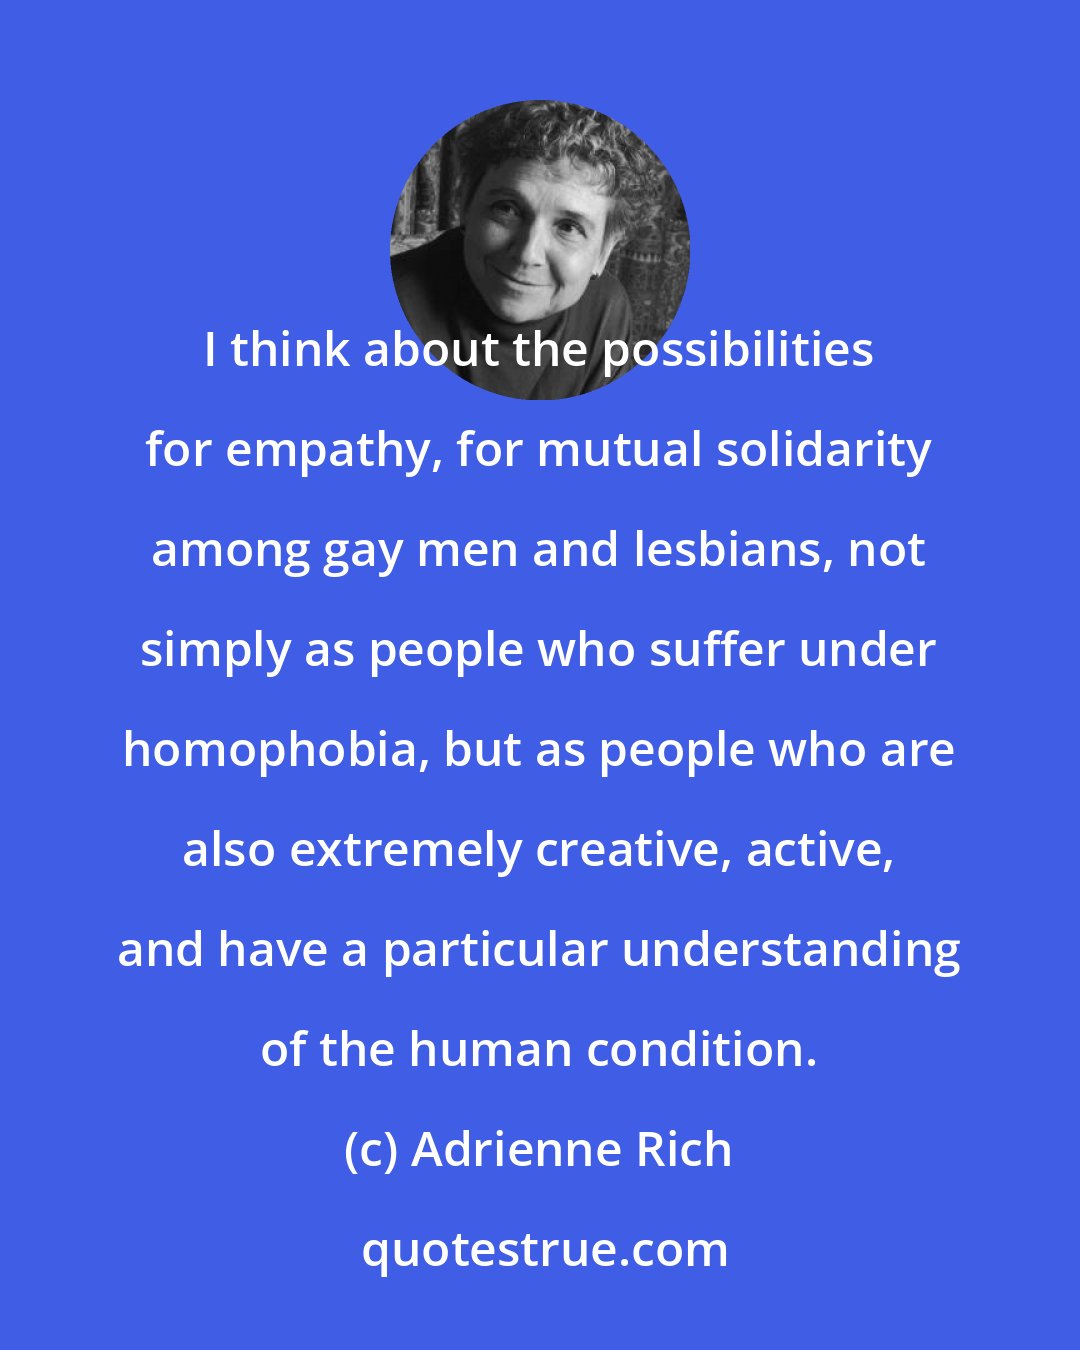 Adrienne Rich: I think about the possibilities for empathy, for mutual solidarity among gay men and lesbians, not simply as people who suffer under homophobia, but as people who are also extremely creative, active, and have a particular understanding of the human condition.